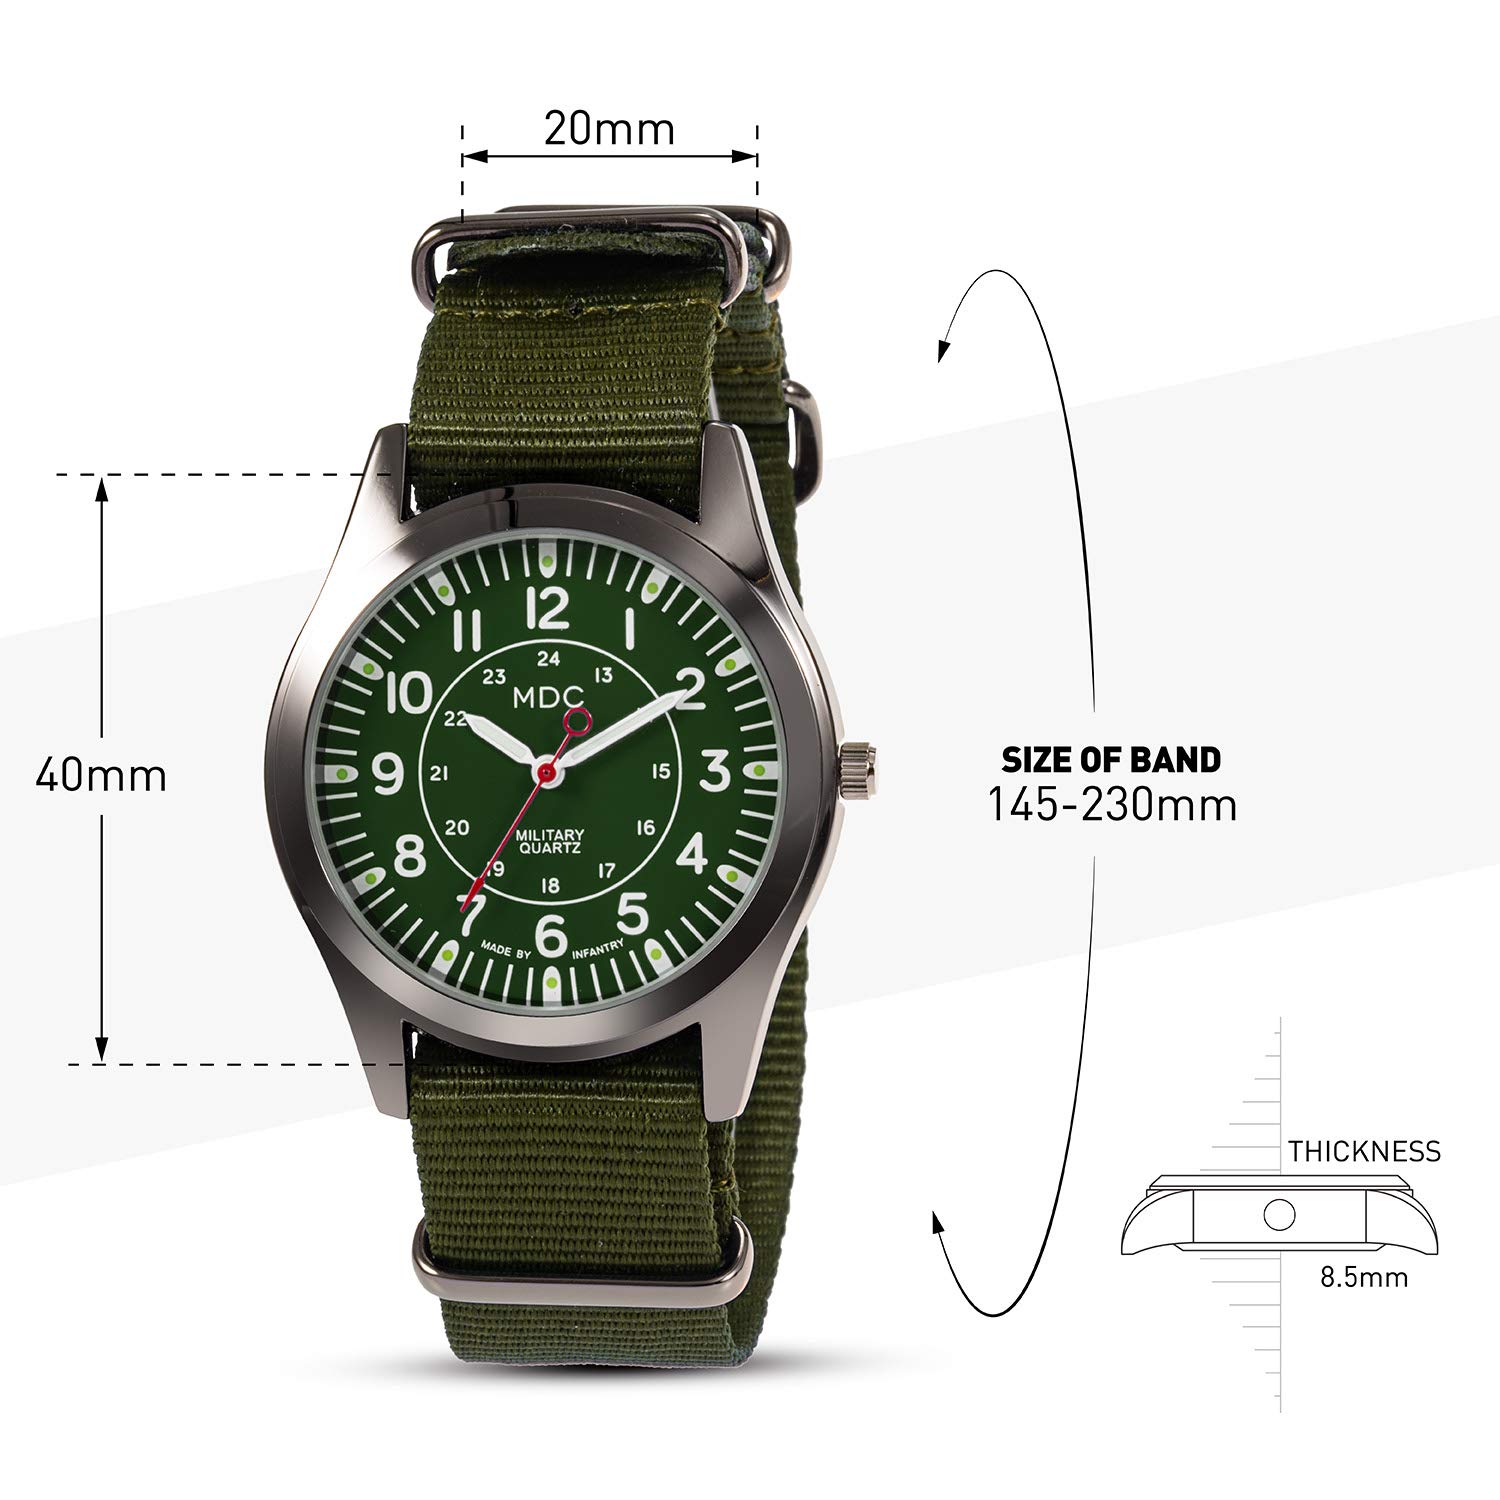 Infantry MDC Mens Analog Watch, 12/24 Hour Military Wrist Watches for Men Tactical, Army Field Wristwatch with Slip-Thru Nylon Band